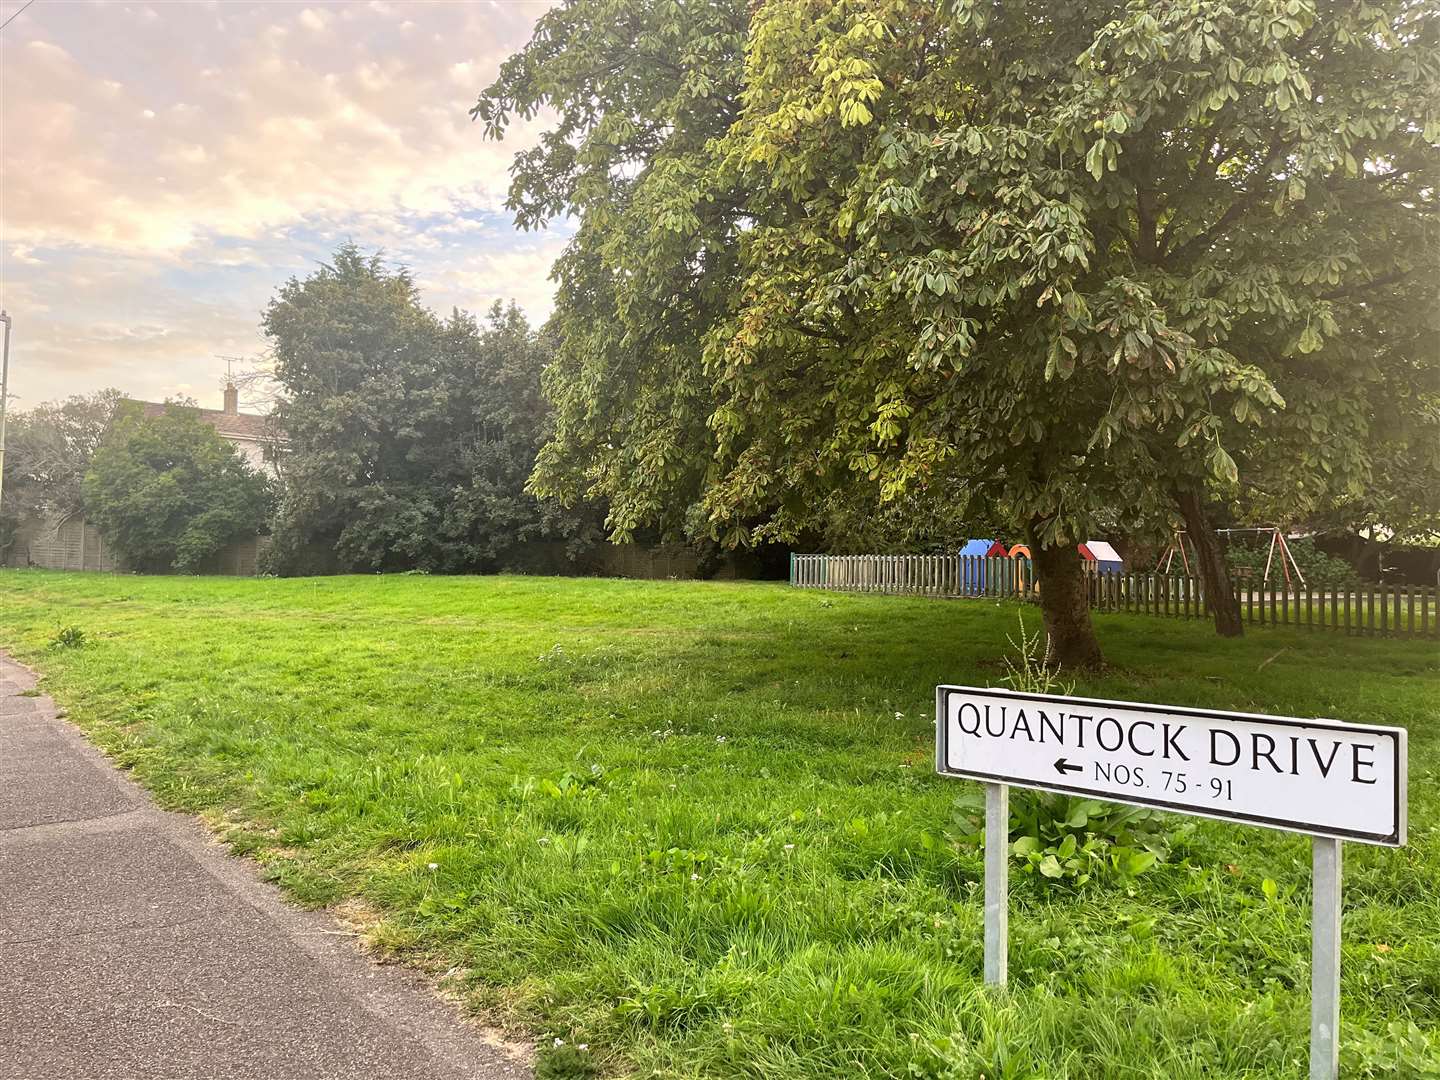 This smaller patch of land next to the play area on the other side of Quantock Drive has also been purchased by Bluesky Properties Estate Ltd